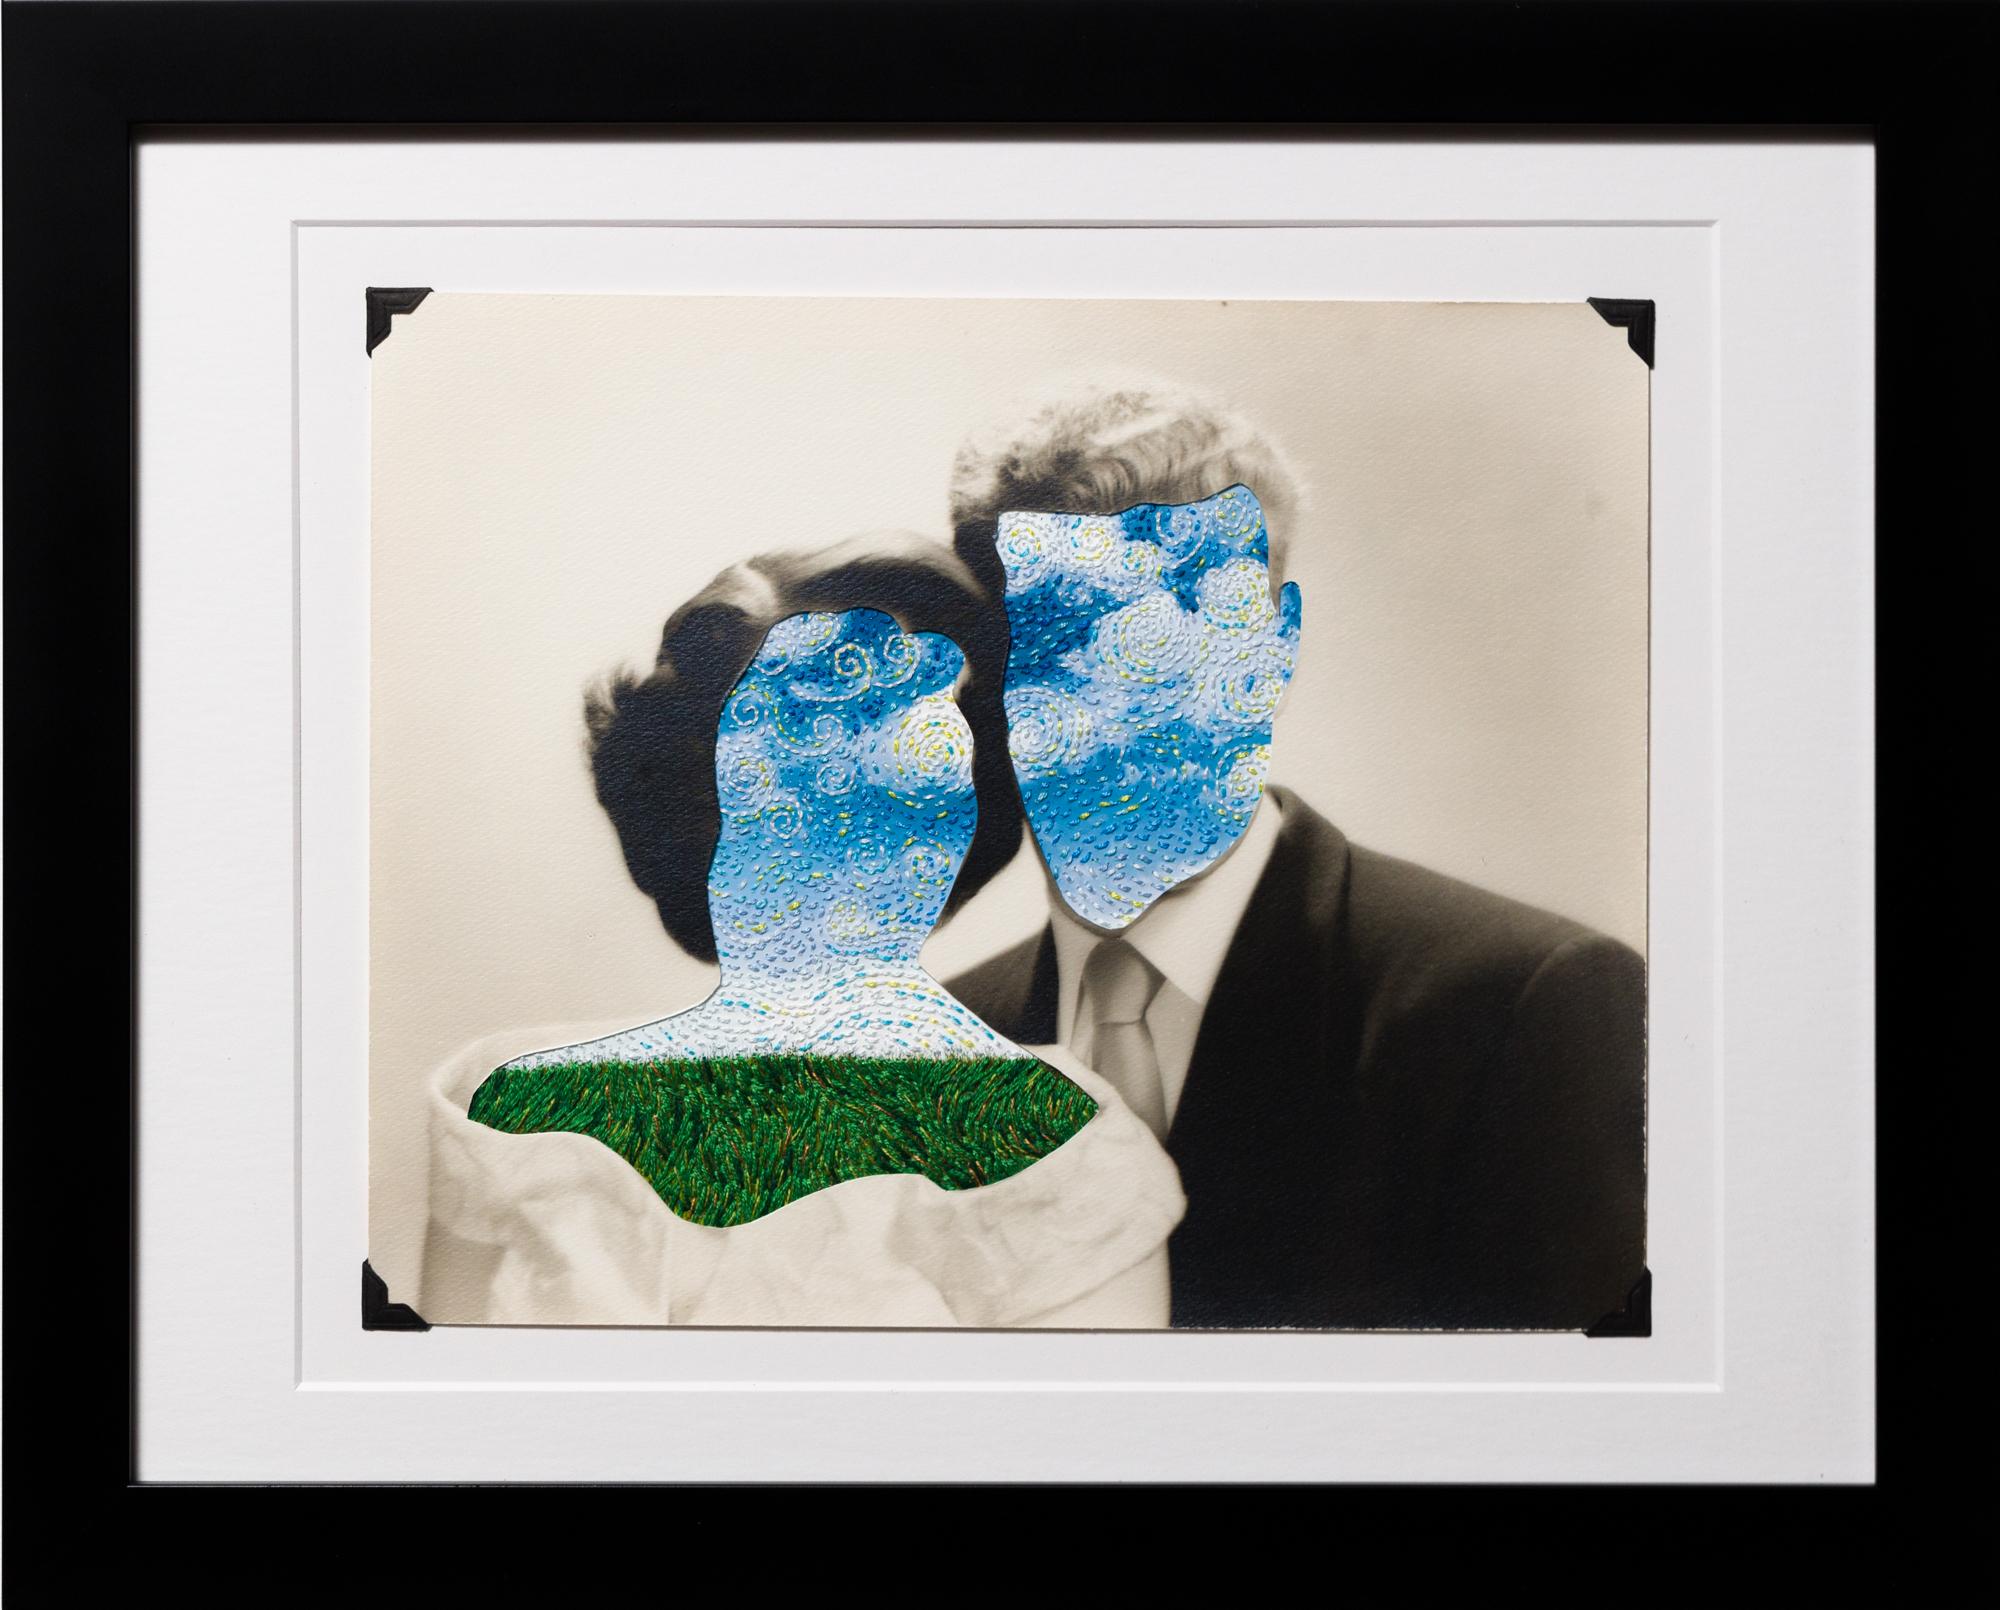 "The Sky-Crossed Lovers" Figurative, Embroidery on Vintage Photograph 